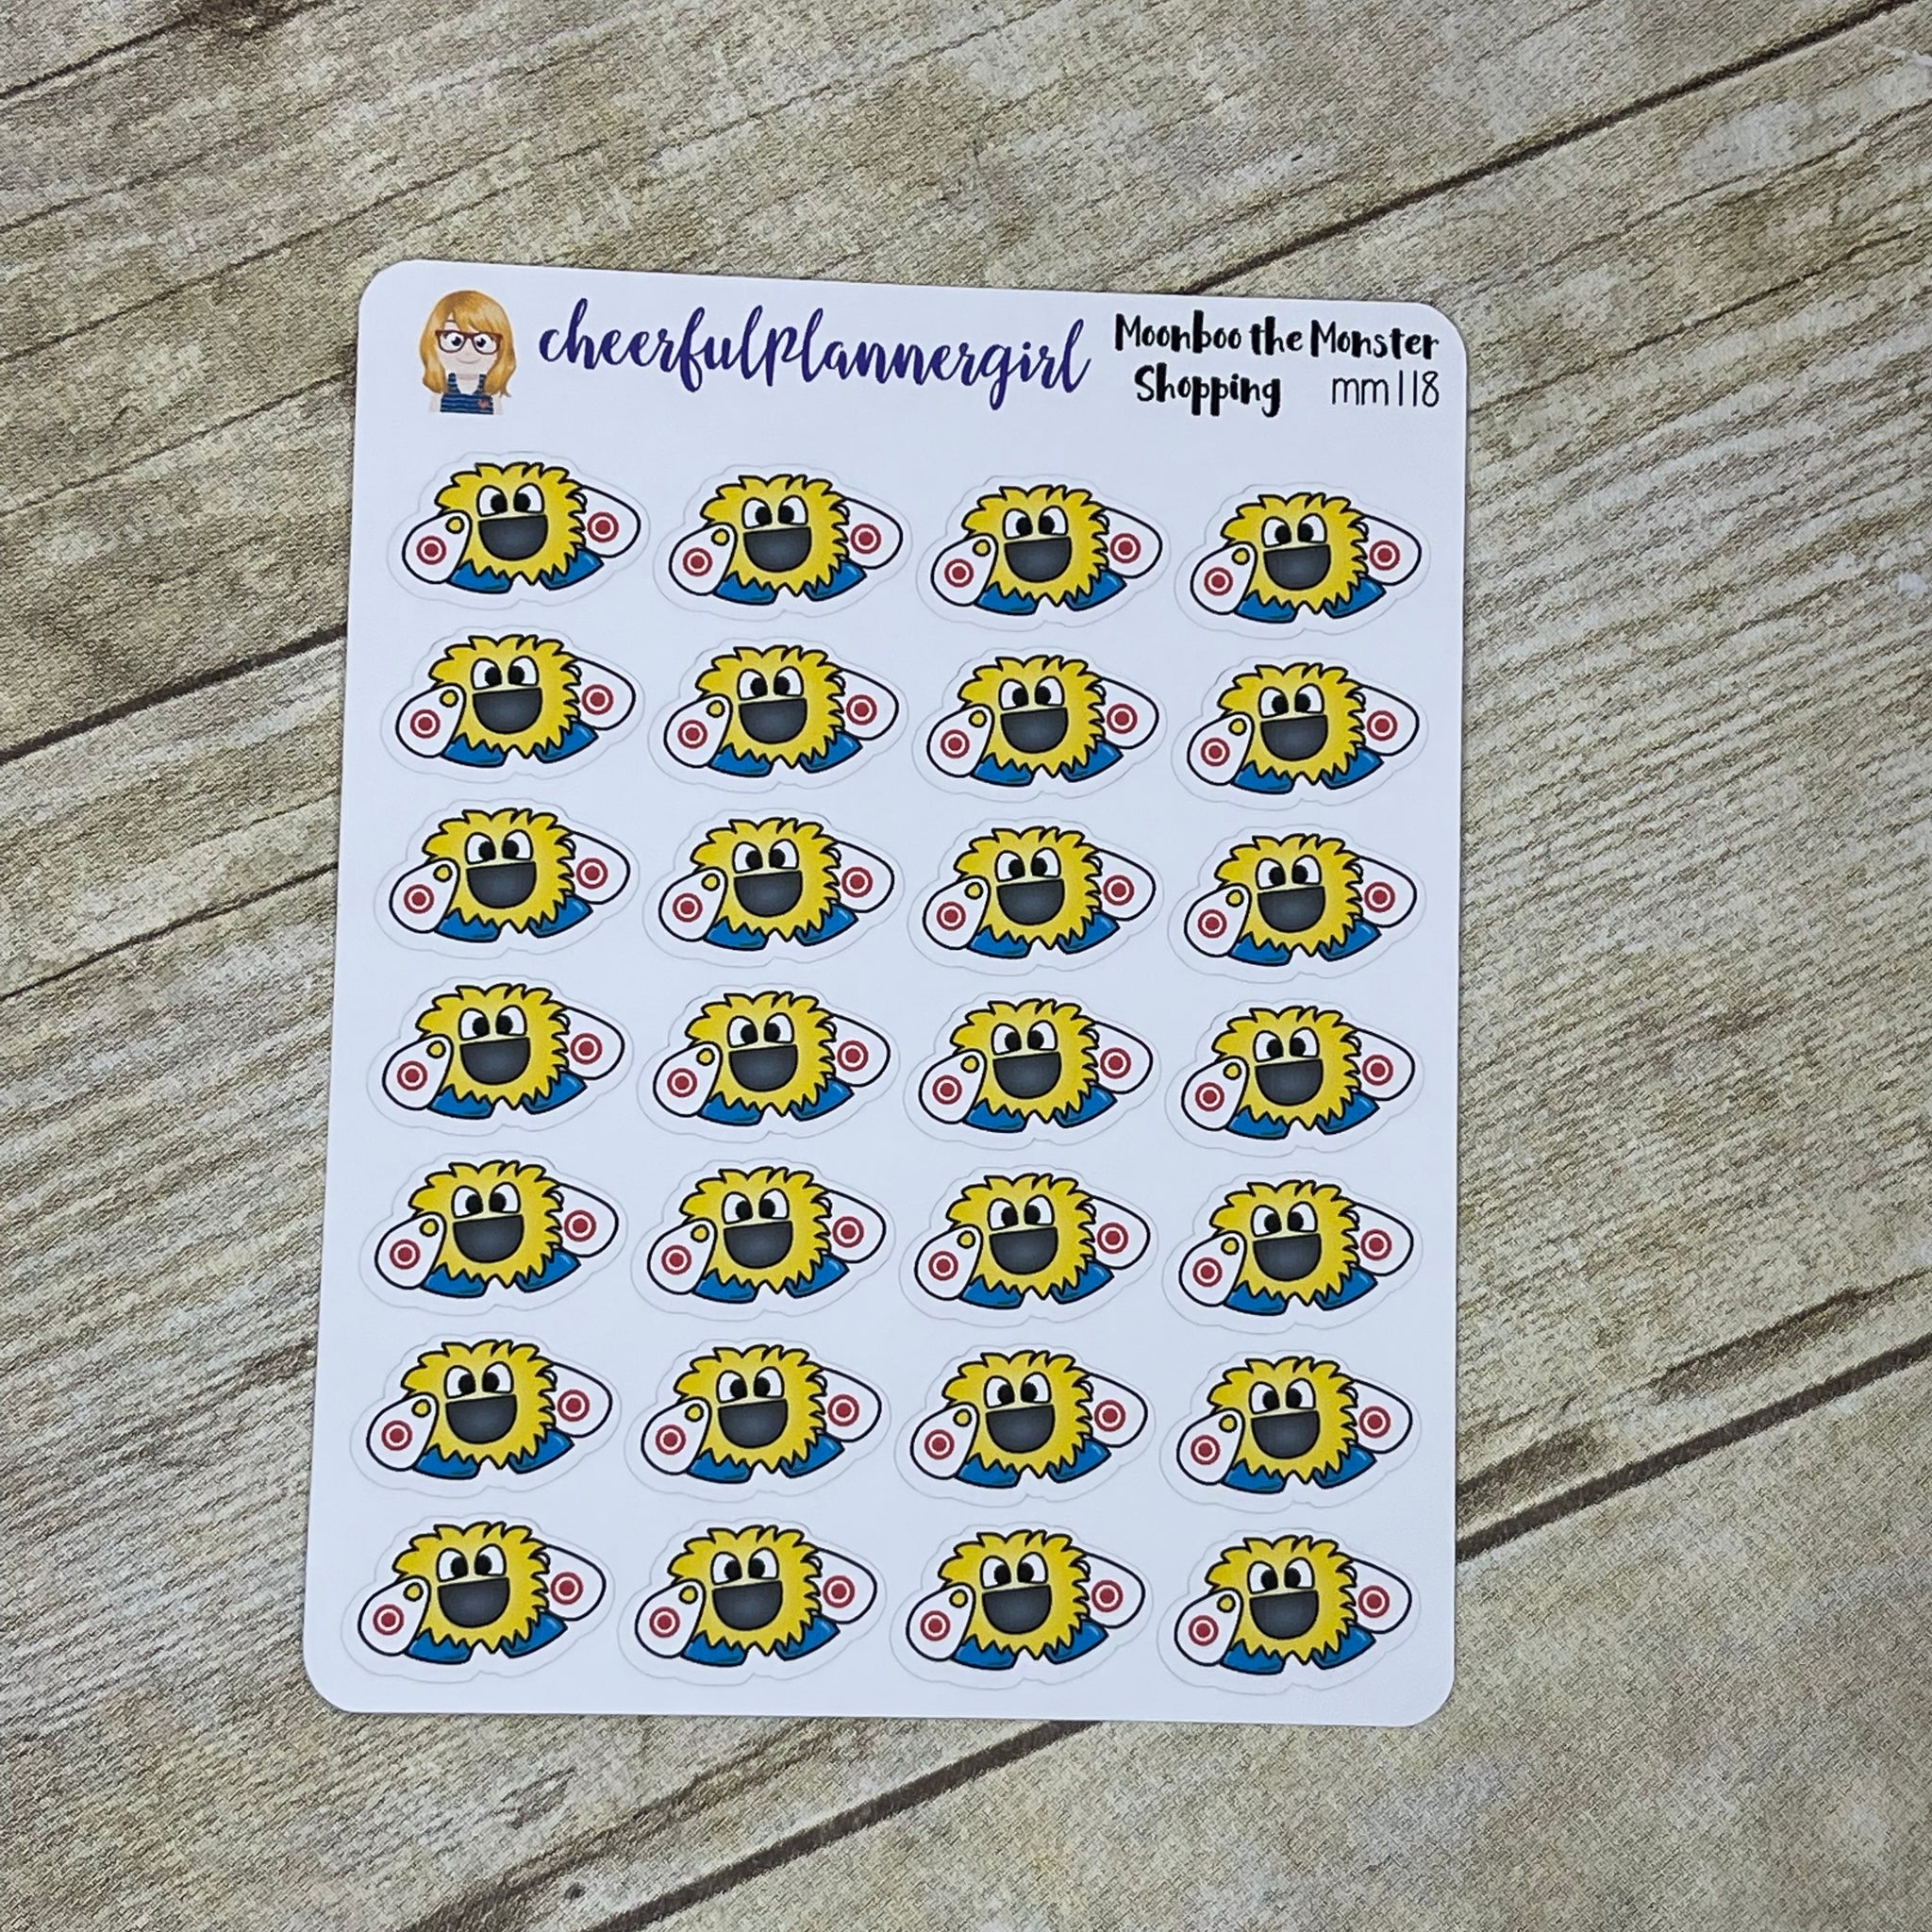 Shopping Moonboo the Monster Planner Stickers